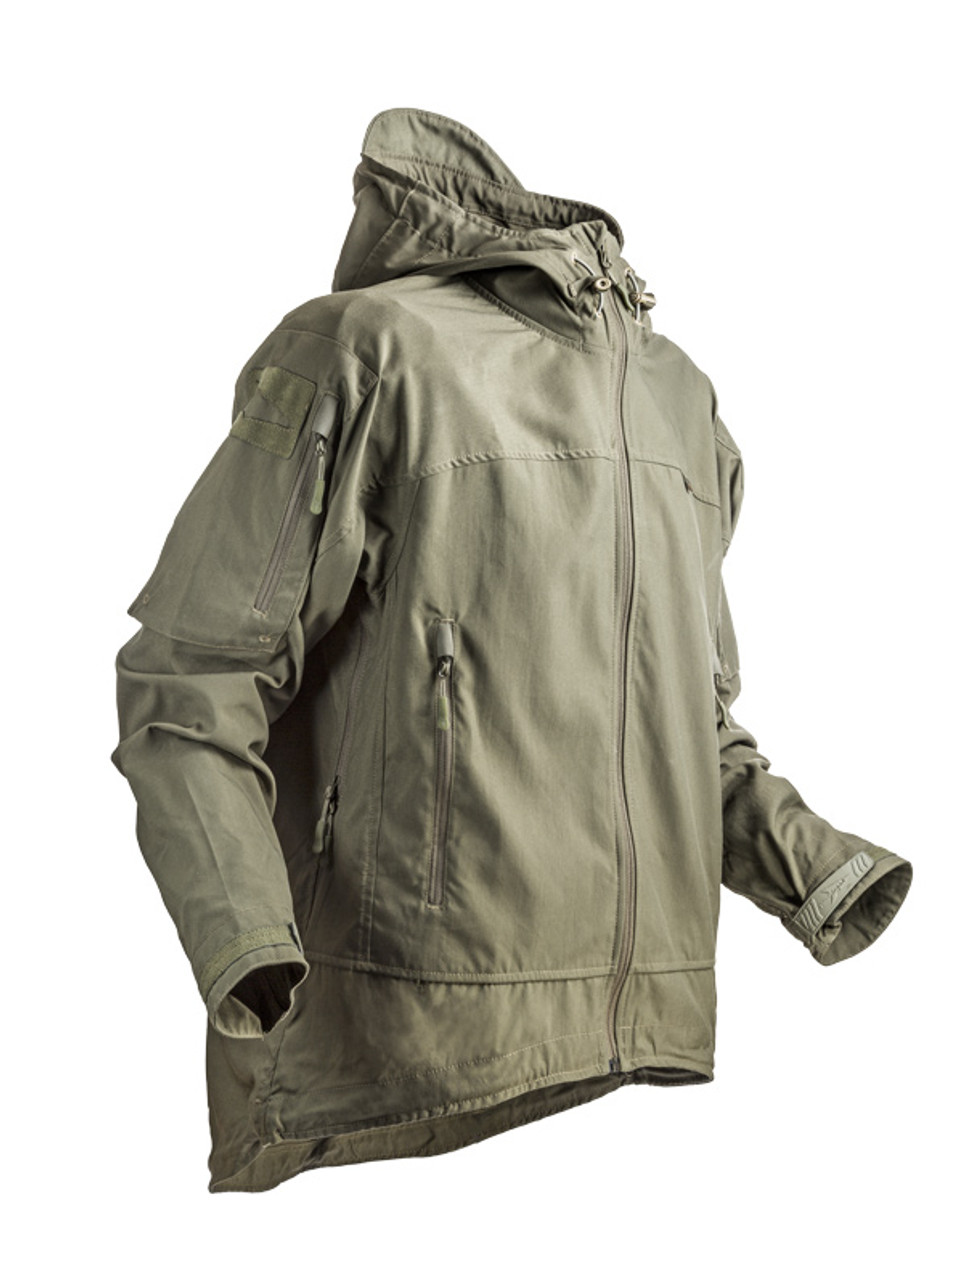 Wind Cheater, Jacket, Technical Jacket, Tactical